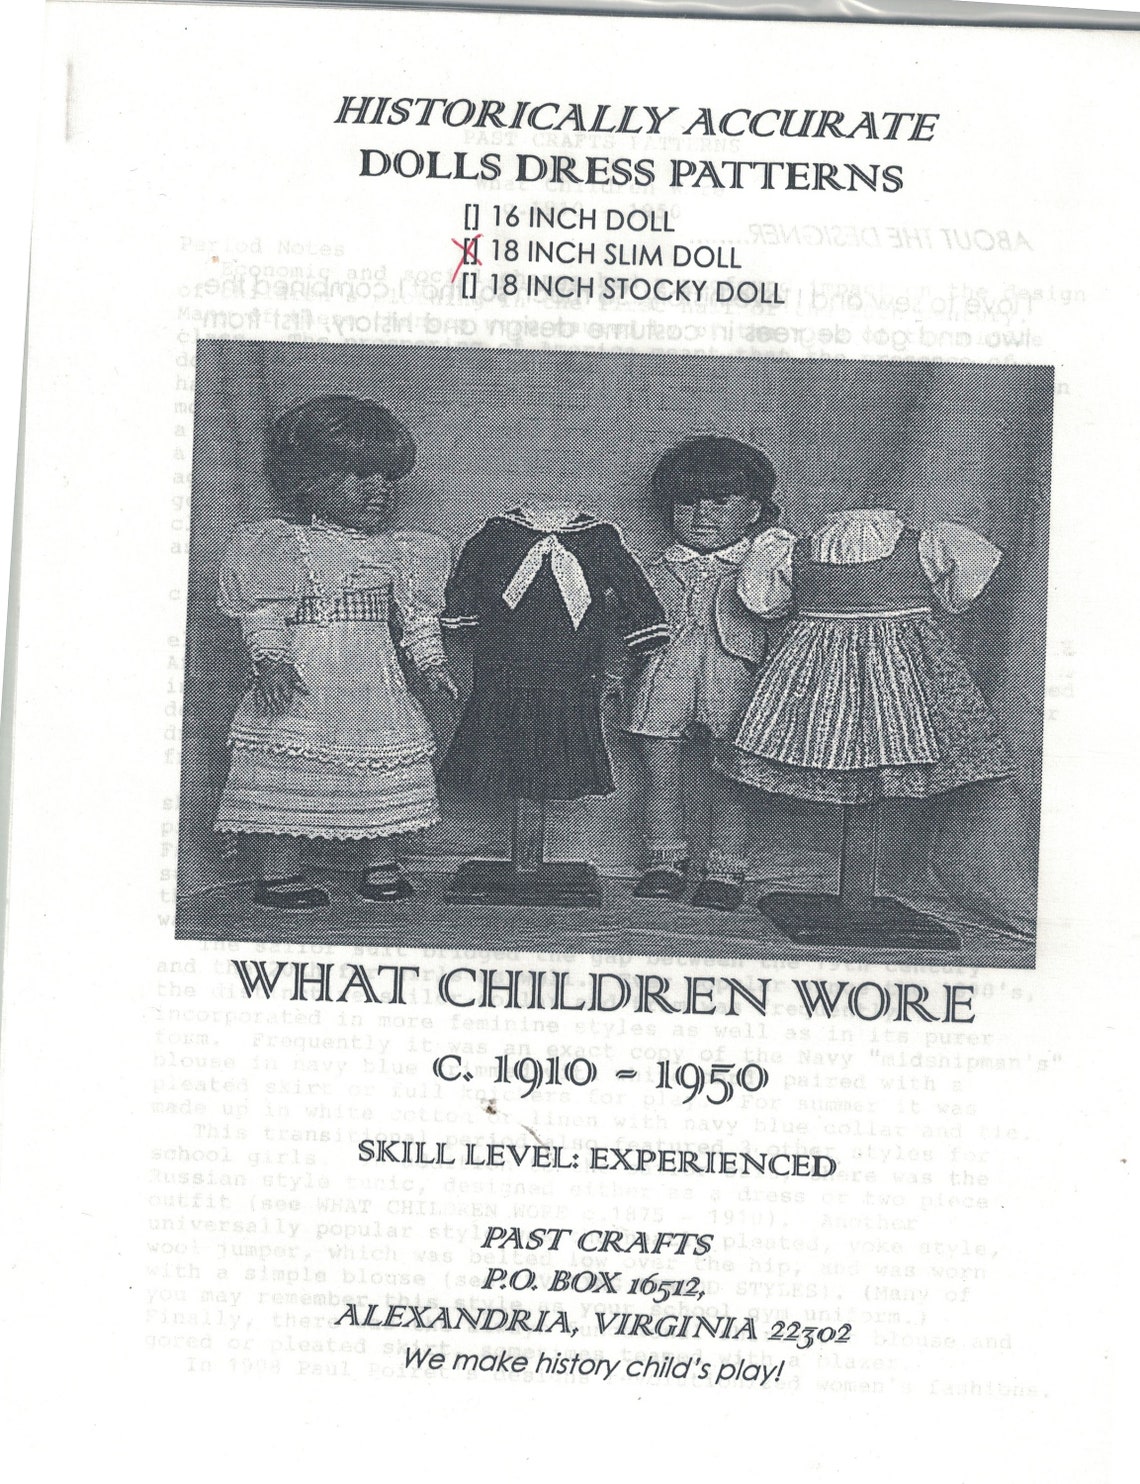 Doll Sewing Pattern Past Crafts What Children Wore 1910-1950 | Etsy